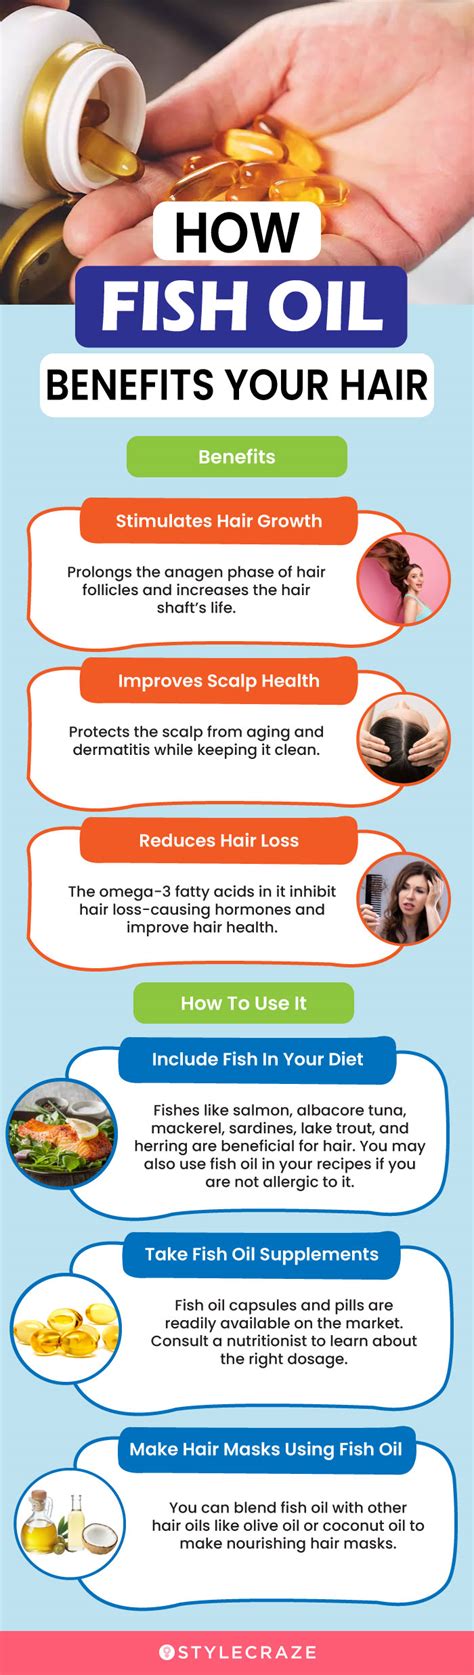 Fish Oil for Hair Growth